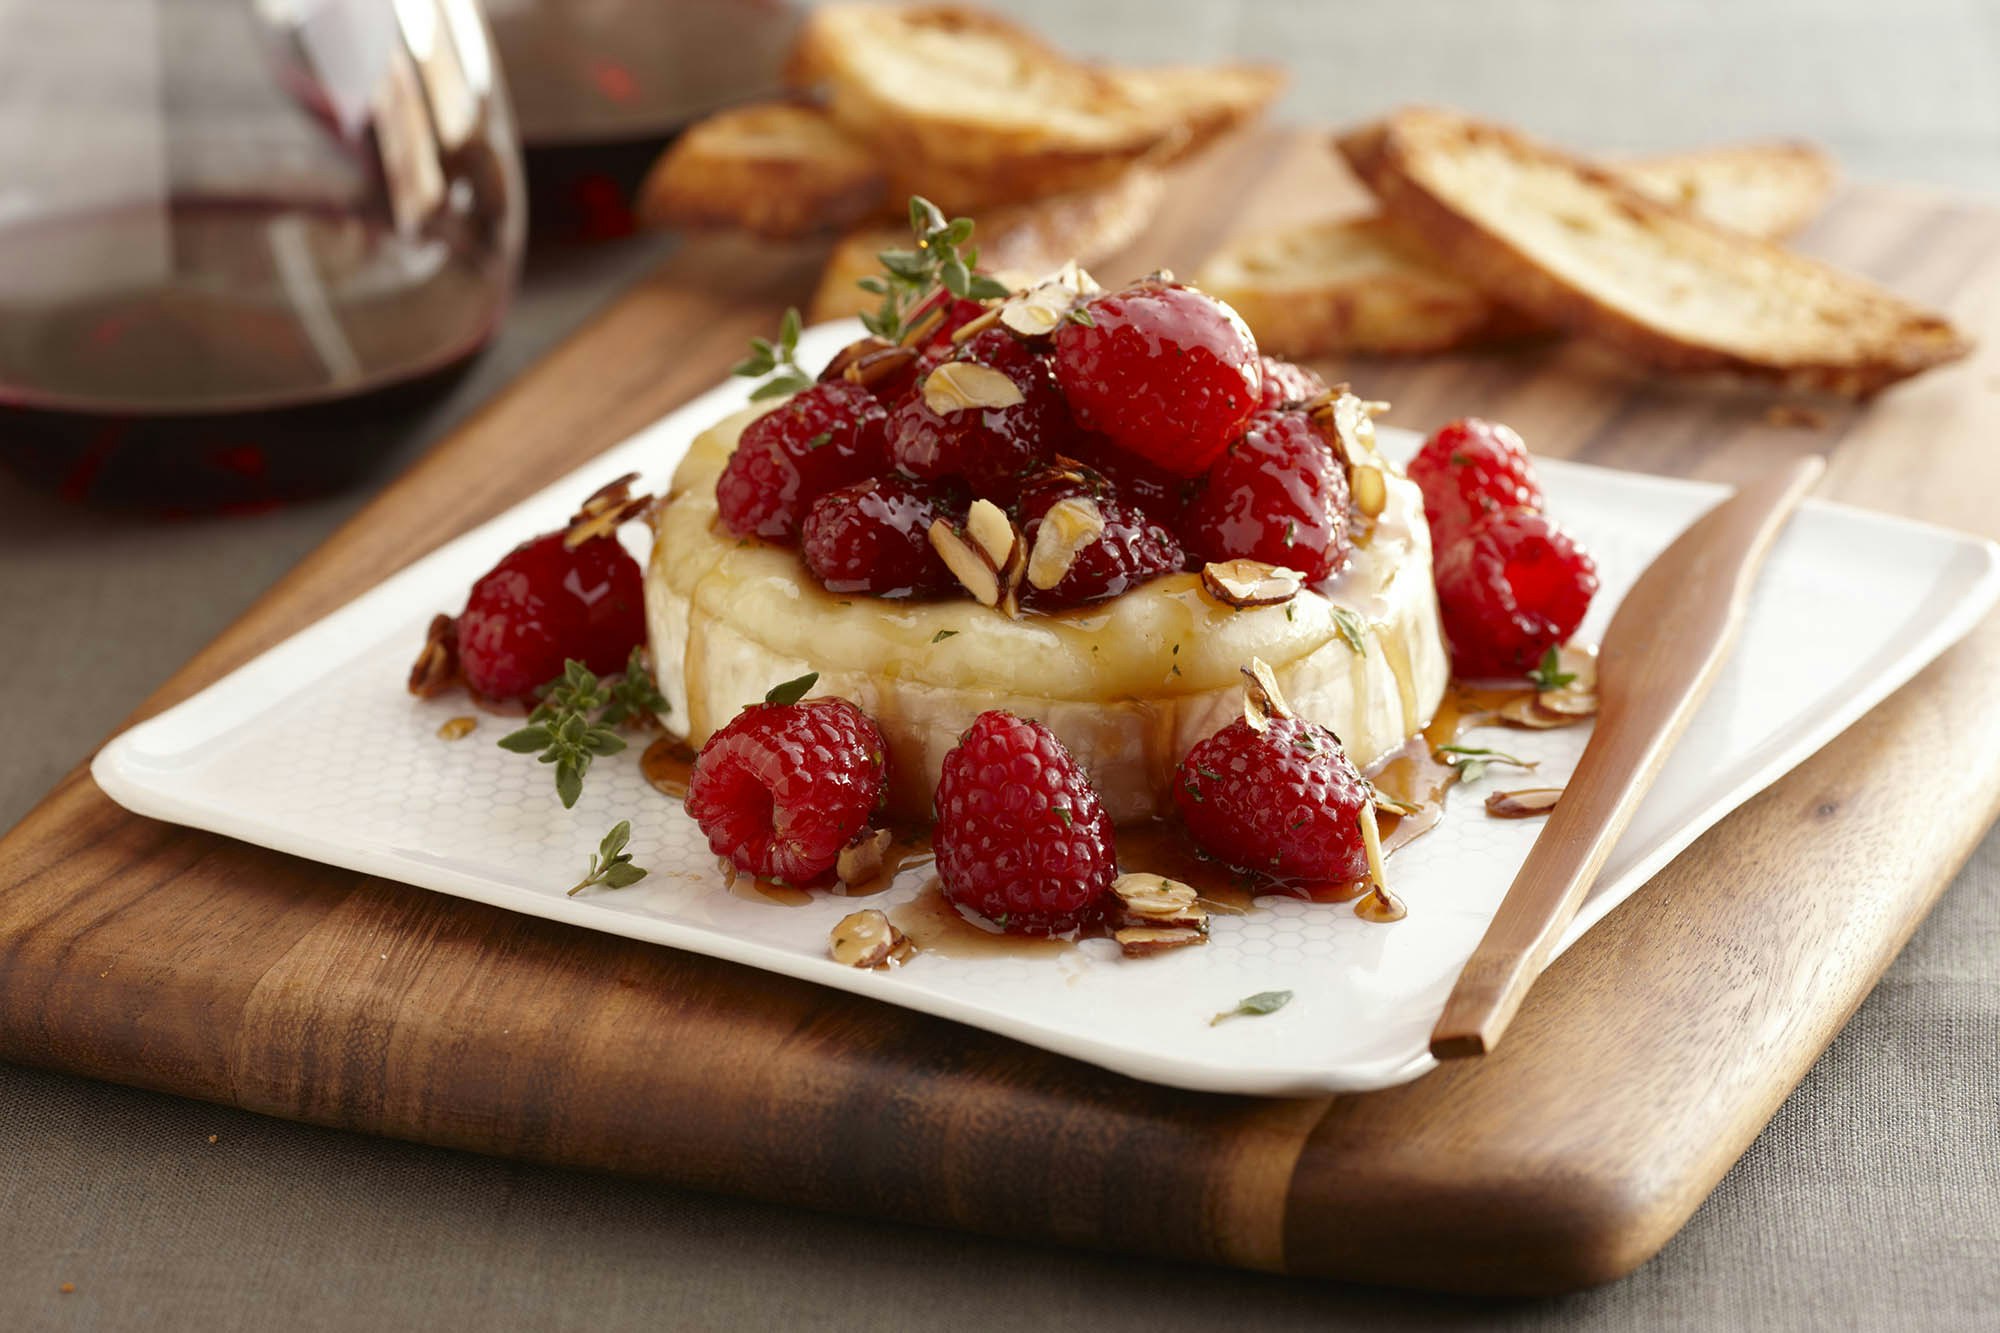 Warm brie with honeyed raspberries and almonds 